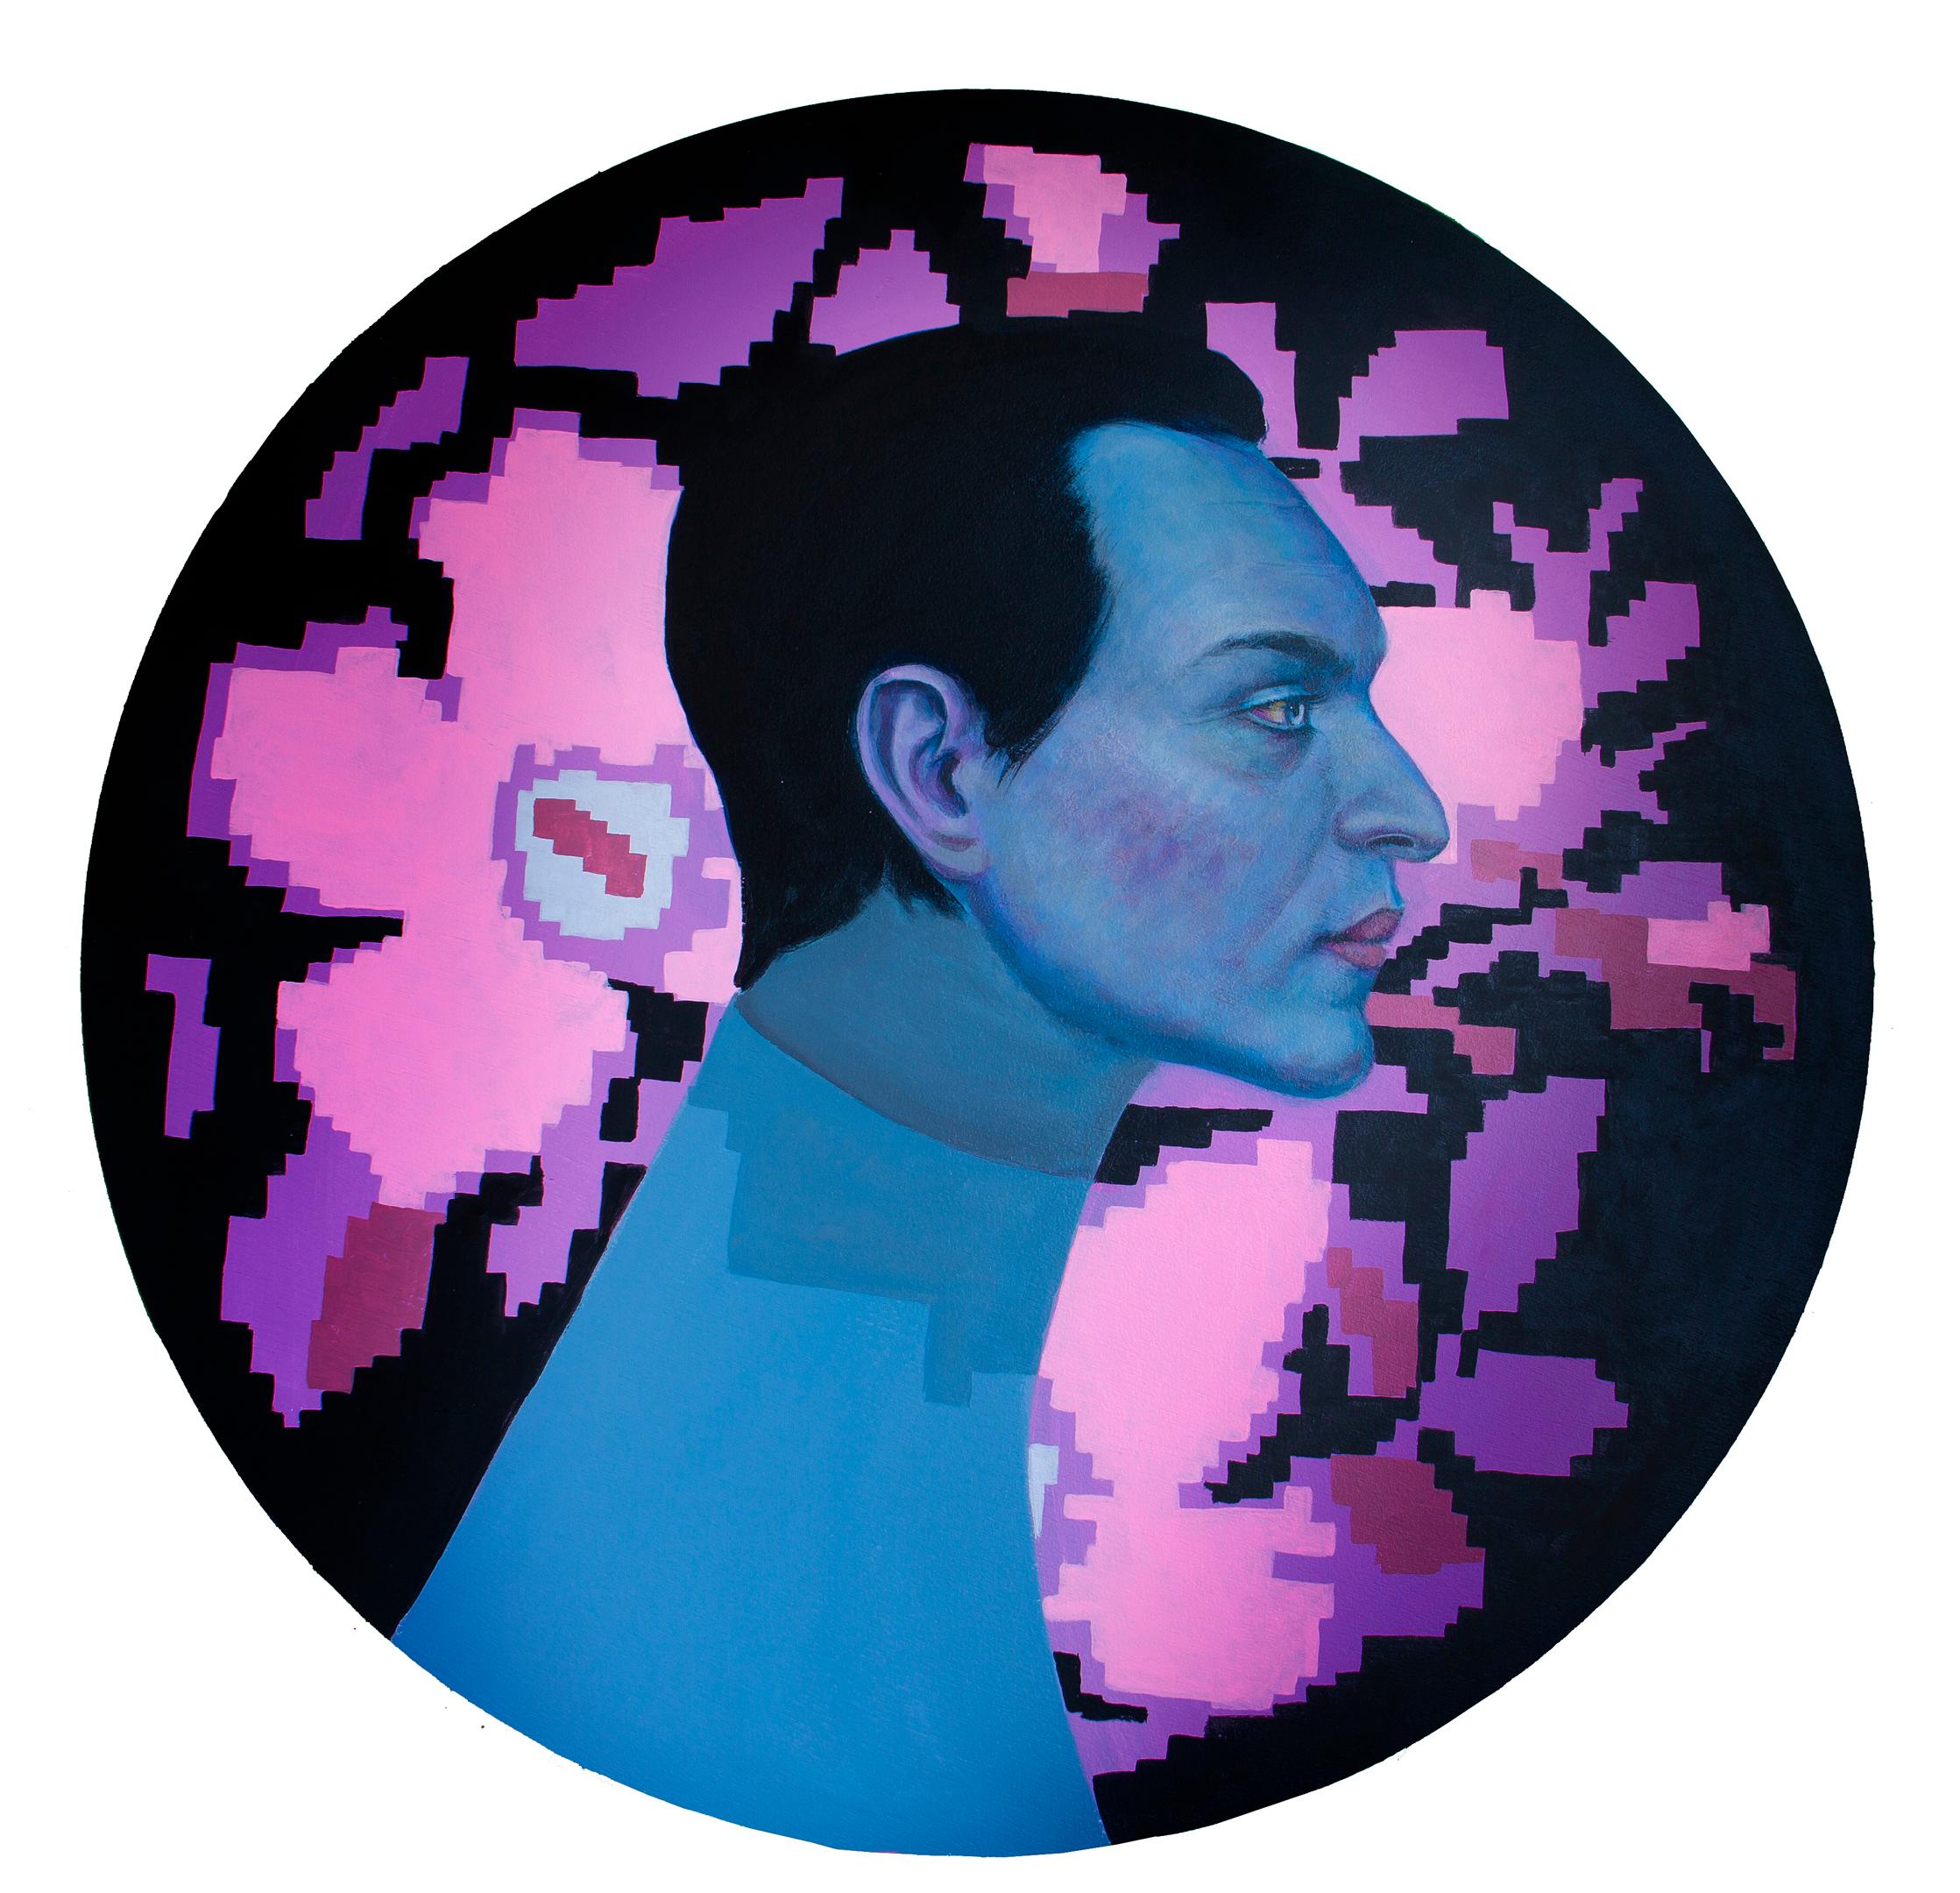 Natasha Lelenco Portrait Painting - Colorful Portrait On A Wooden Circle. Man On A Floral Background. "Currency #1" 